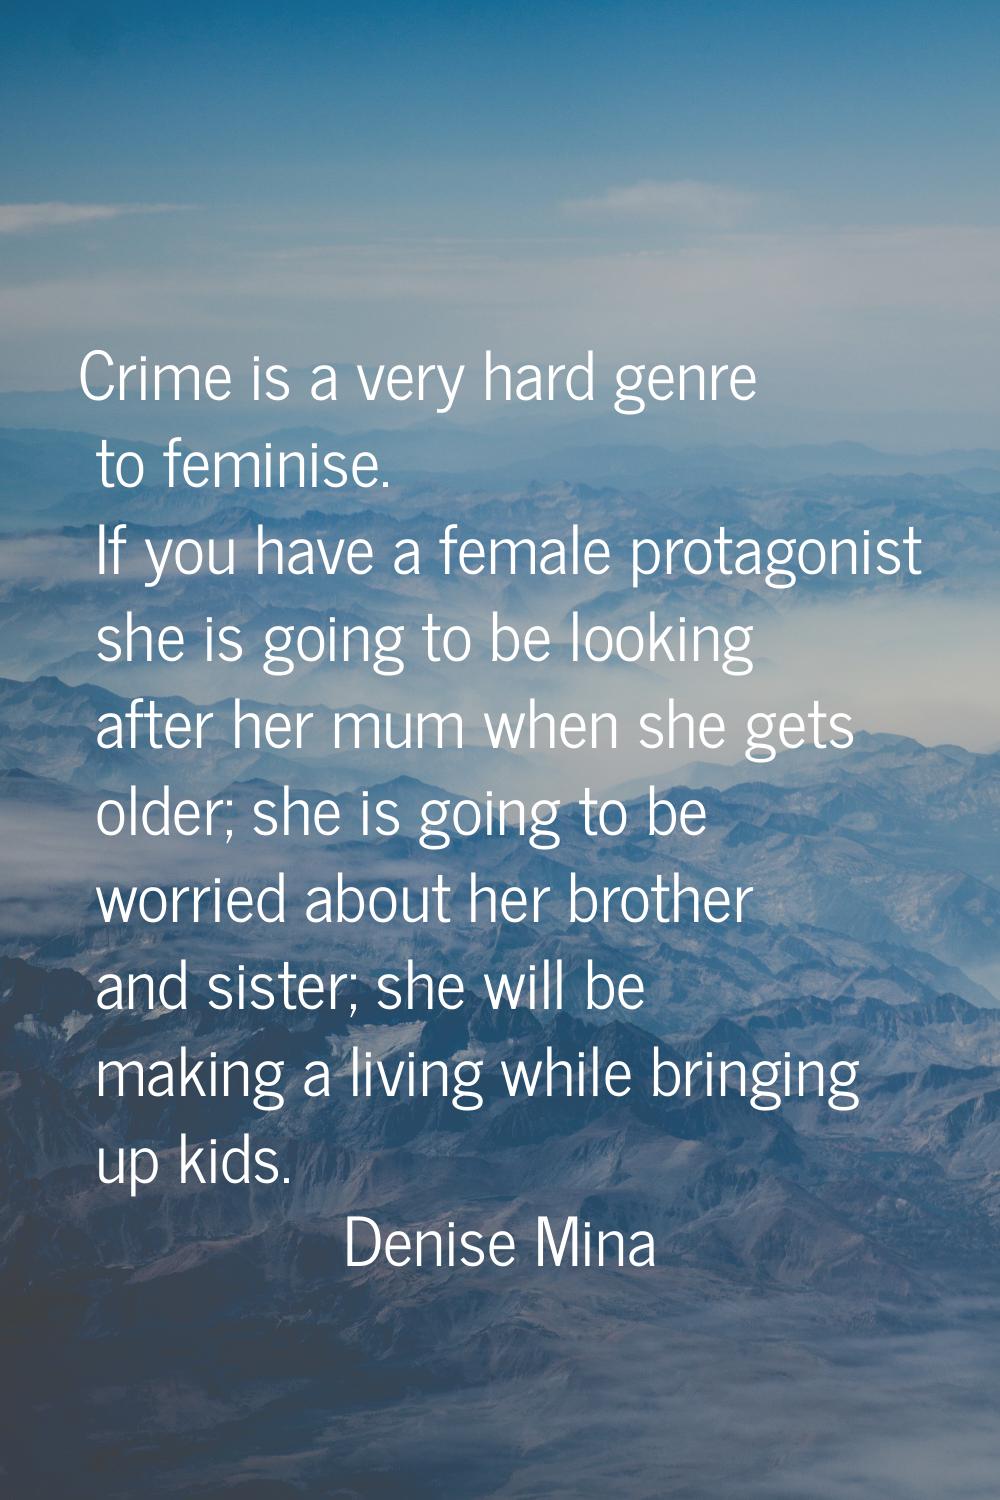 Crime is a very hard genre to feminise. If you have a female protagonist she is going to be looking